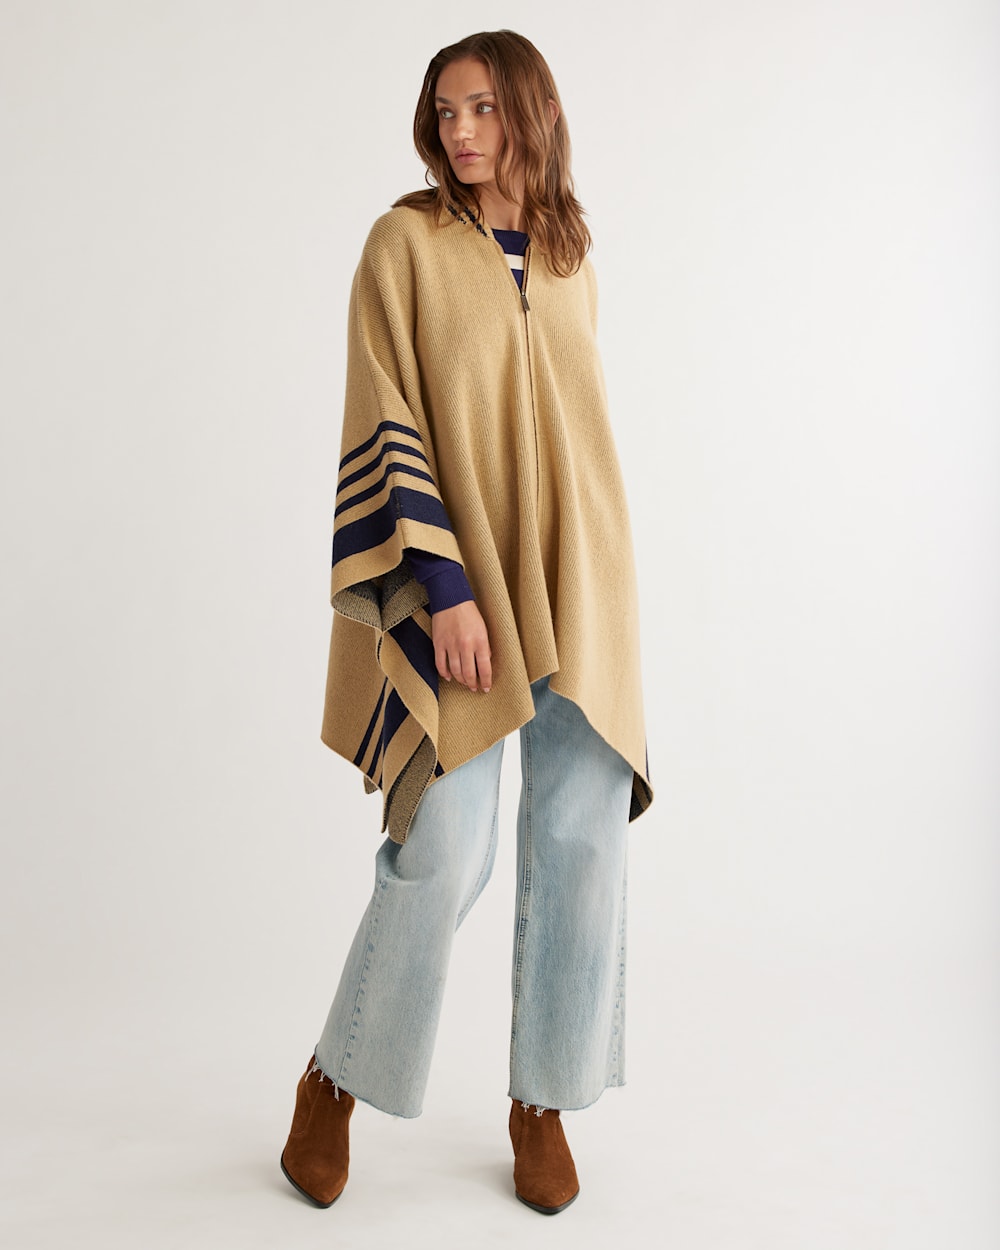 ALTERNATE VIEW OF WOMEN'S LAMBSWOOL KNIT BLANKET CAPE IN CAMEL/NAVY image number 4